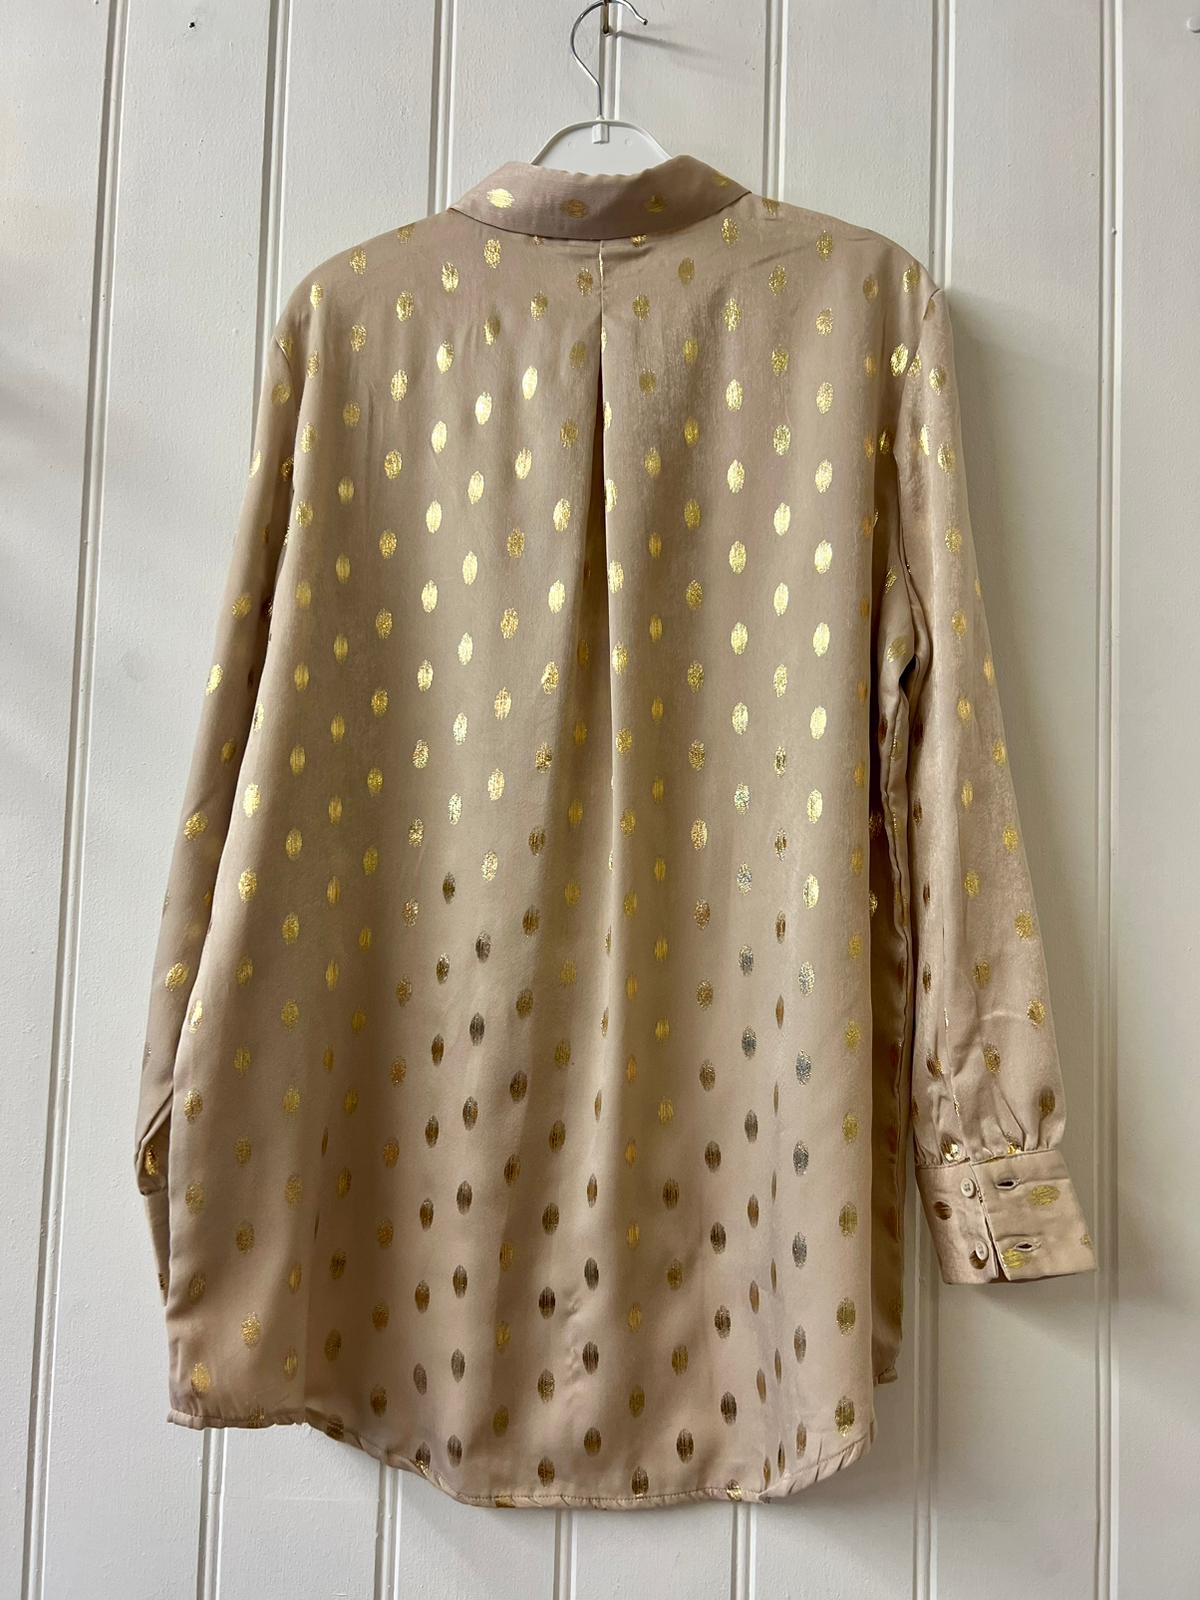 Fransa gold and taupe shirt L